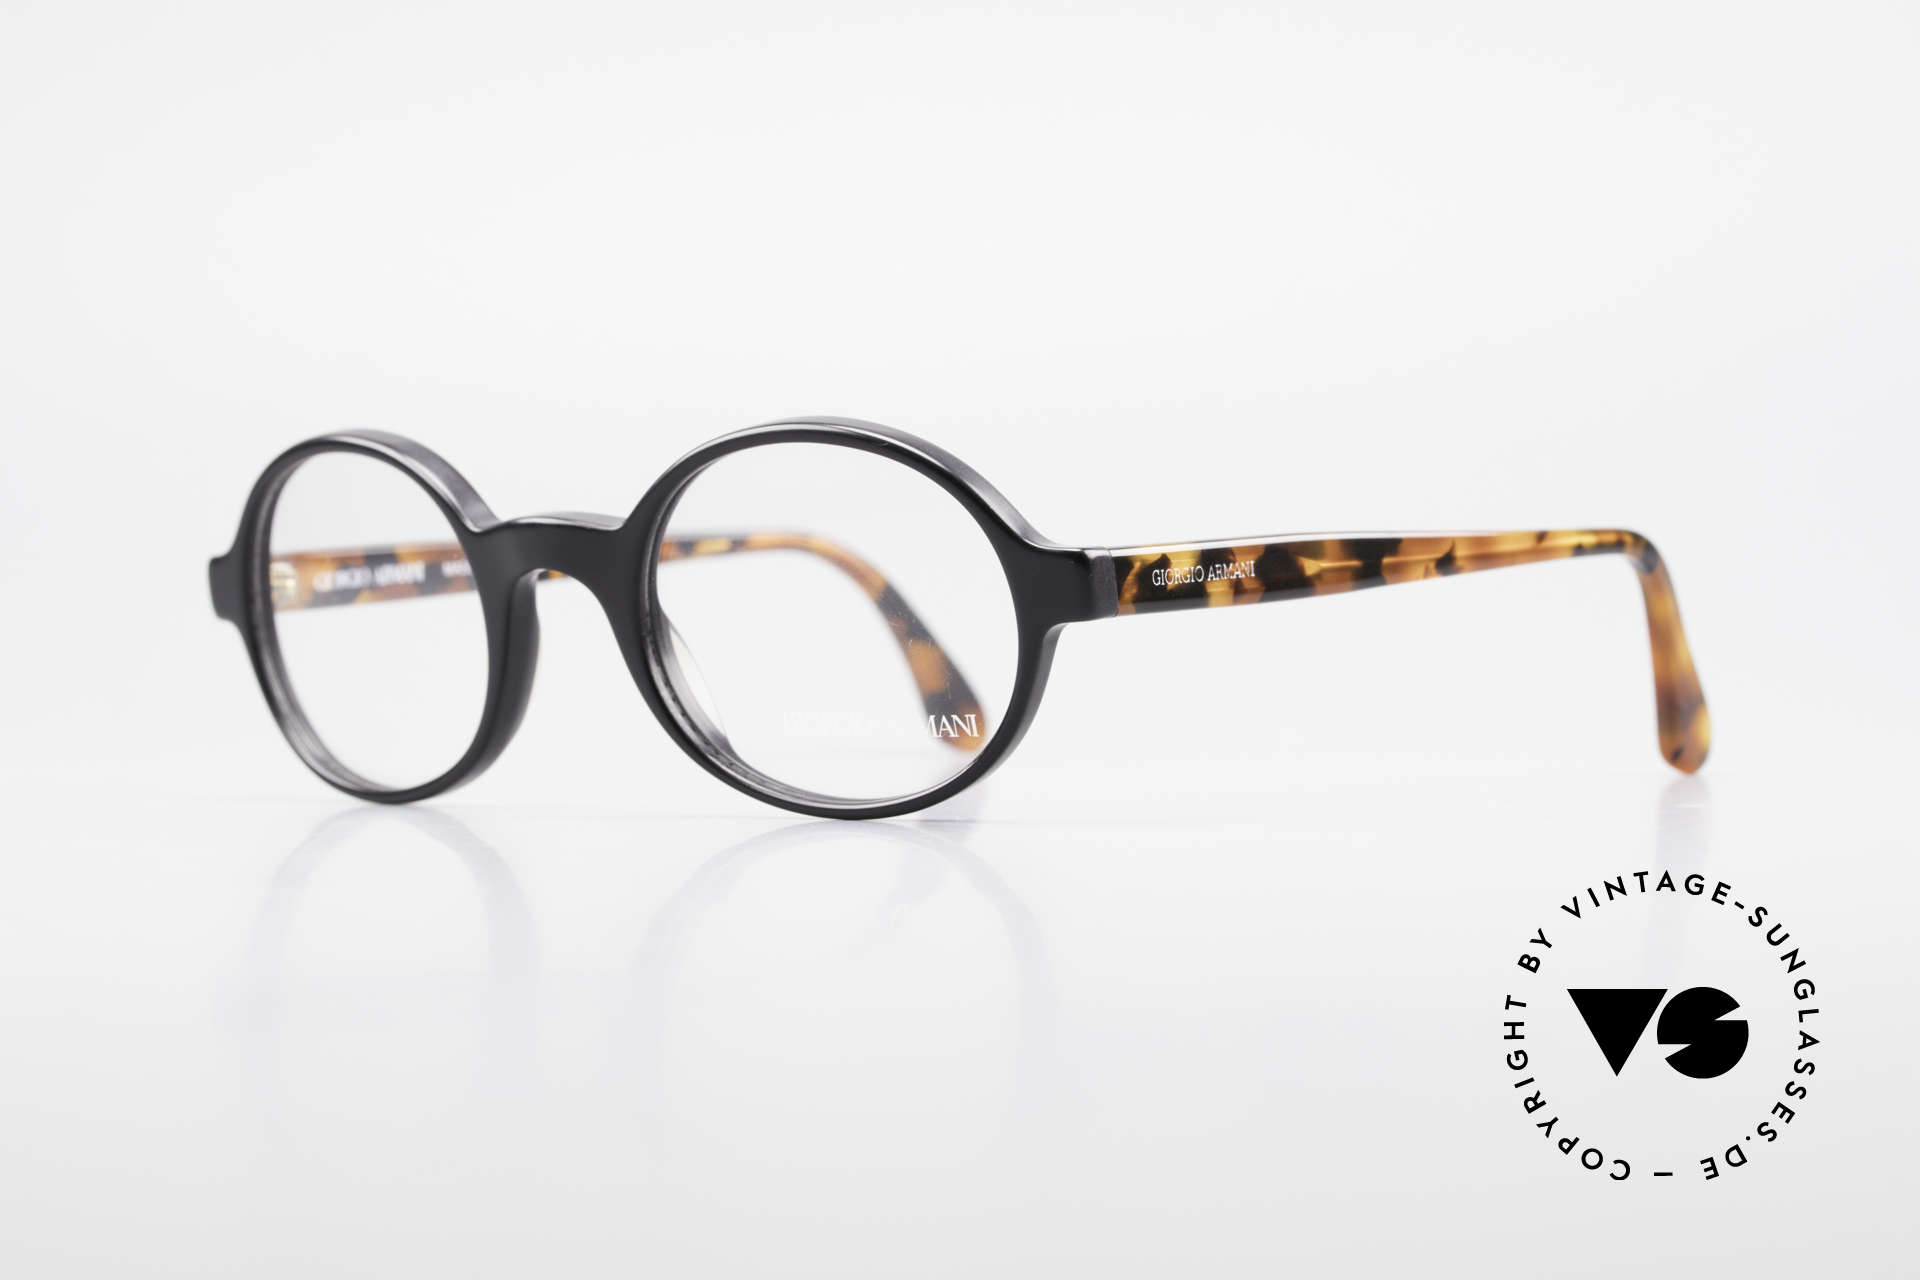 Giorgio Armani 308 Oval 80's Vintage Eyeglasses, high-end craftsmanship and very pleasant to wear, Made for Men and Women